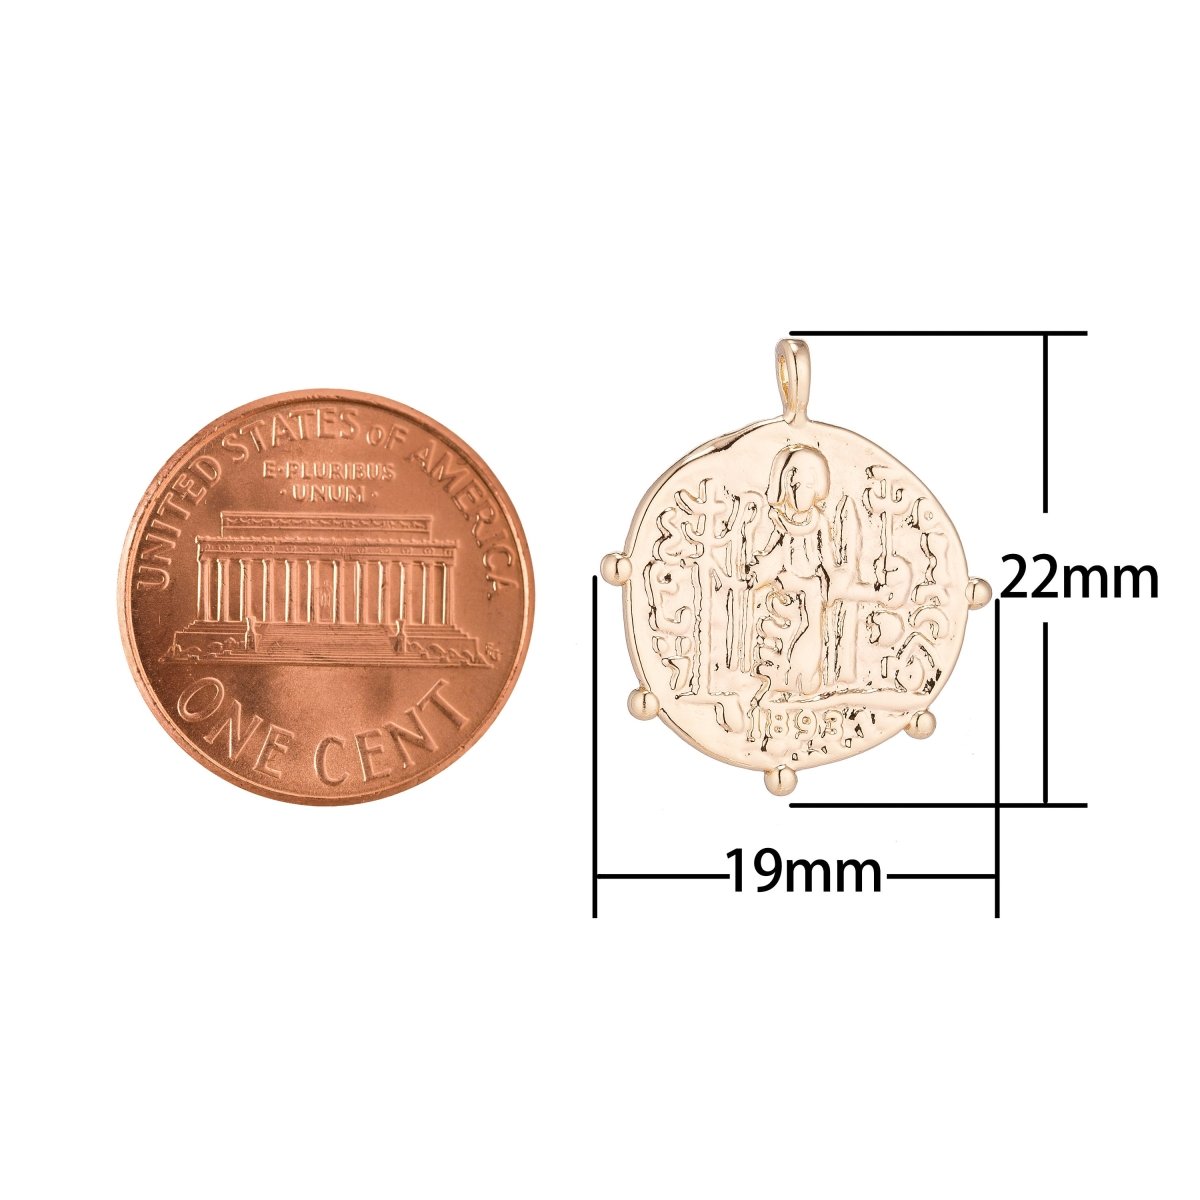 OS Dainty 18k Gold Filled Coin Saint Benedict Charm Rustic Medallion for Bracelet Necklace Pendant Earring Findings for Jewelry Making C-093 - DLUXCA